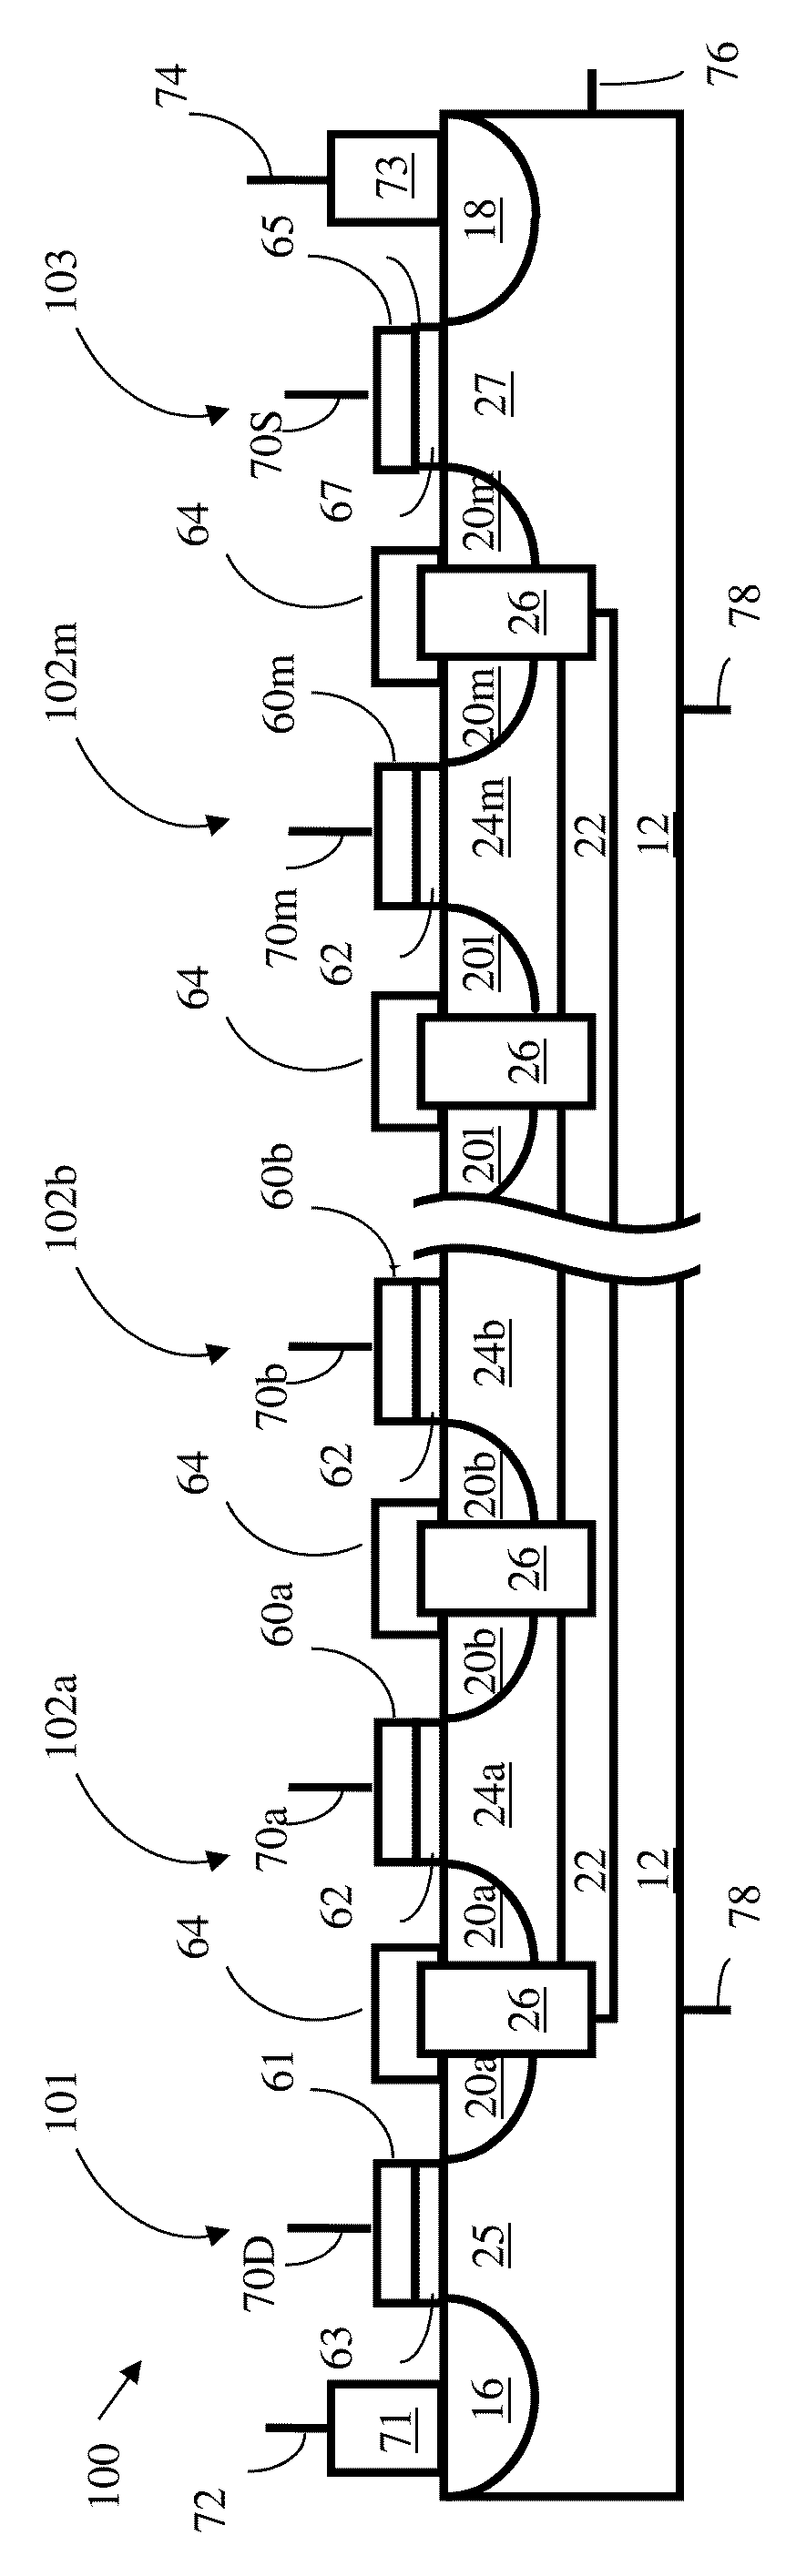 NAND String Utilizing Floating Body Memory Cell